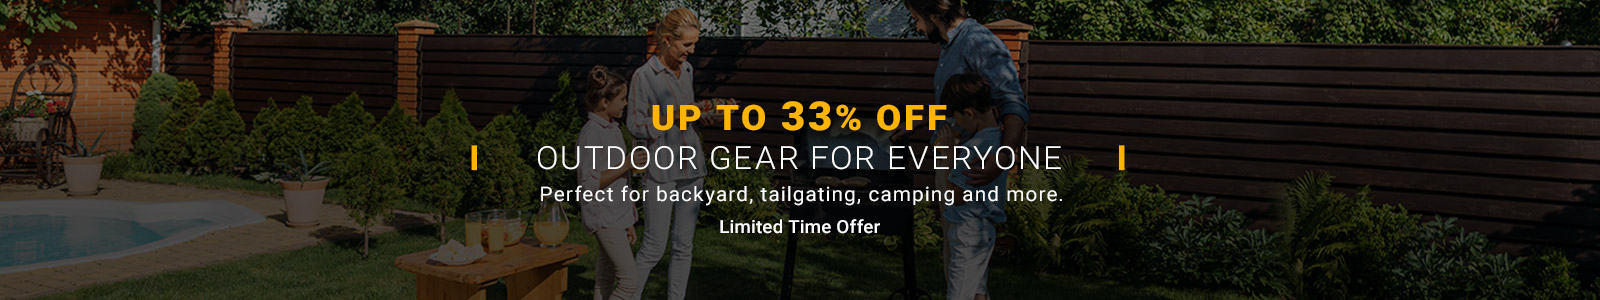 10% off
Outdoor Games for Everyone
Perfect for backyard, tailgating, camping and more. 
Limited Time Offer
Shop Now